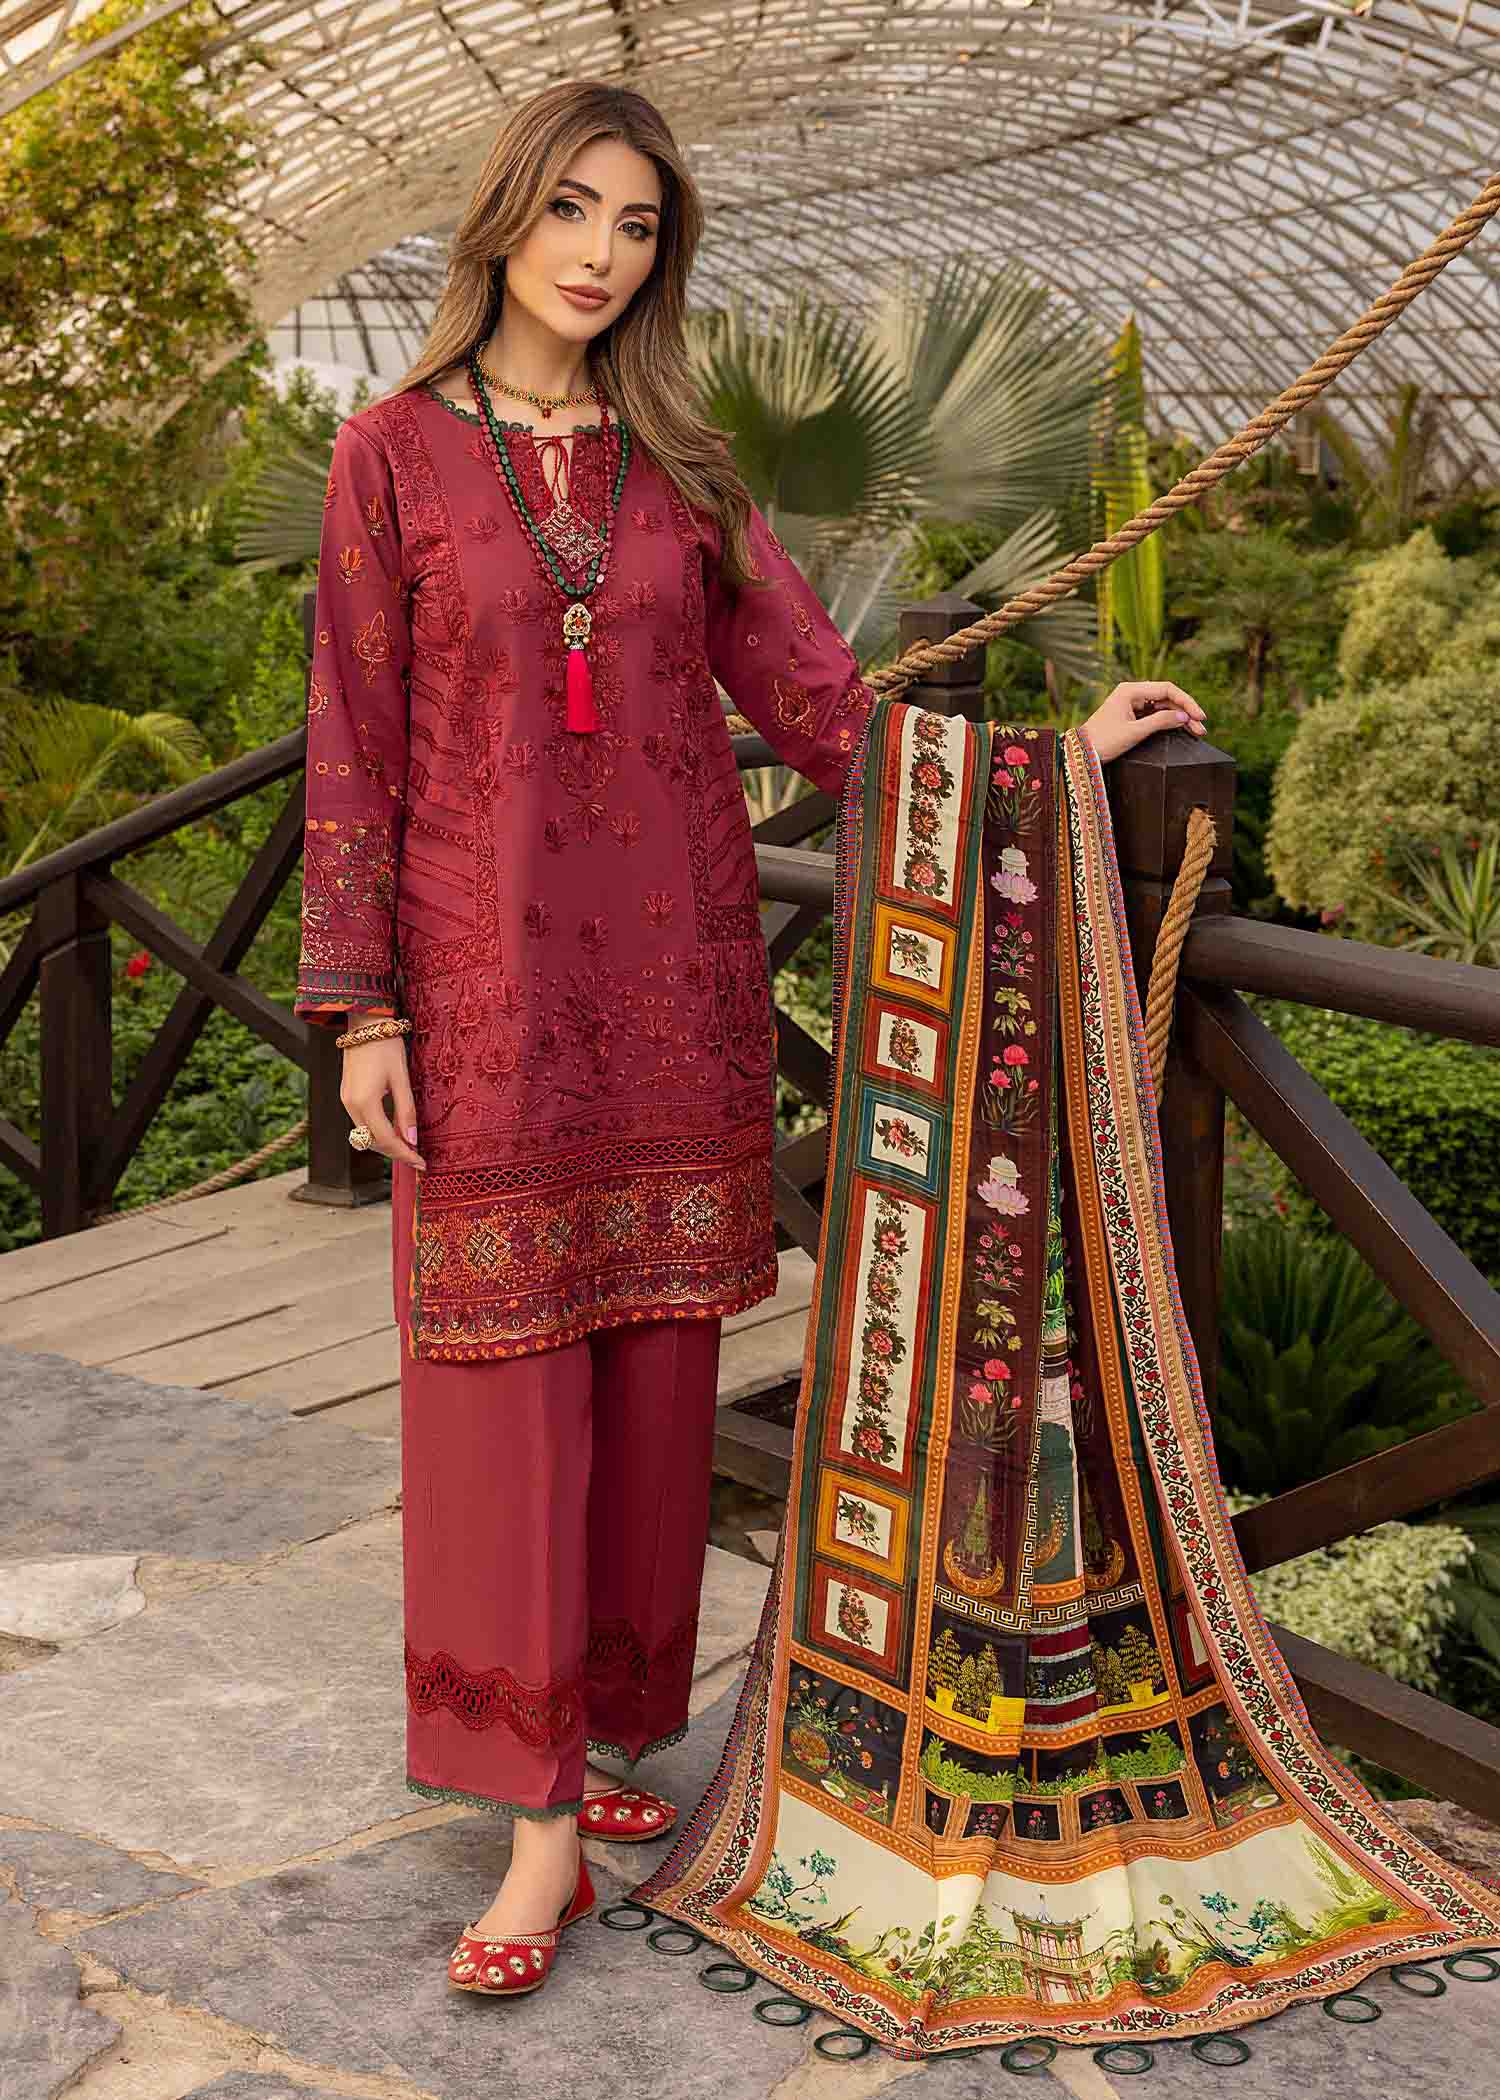 Arzoo Embroidered Unstitched Pakistani Lawn Suits With Organza Dupatta ...